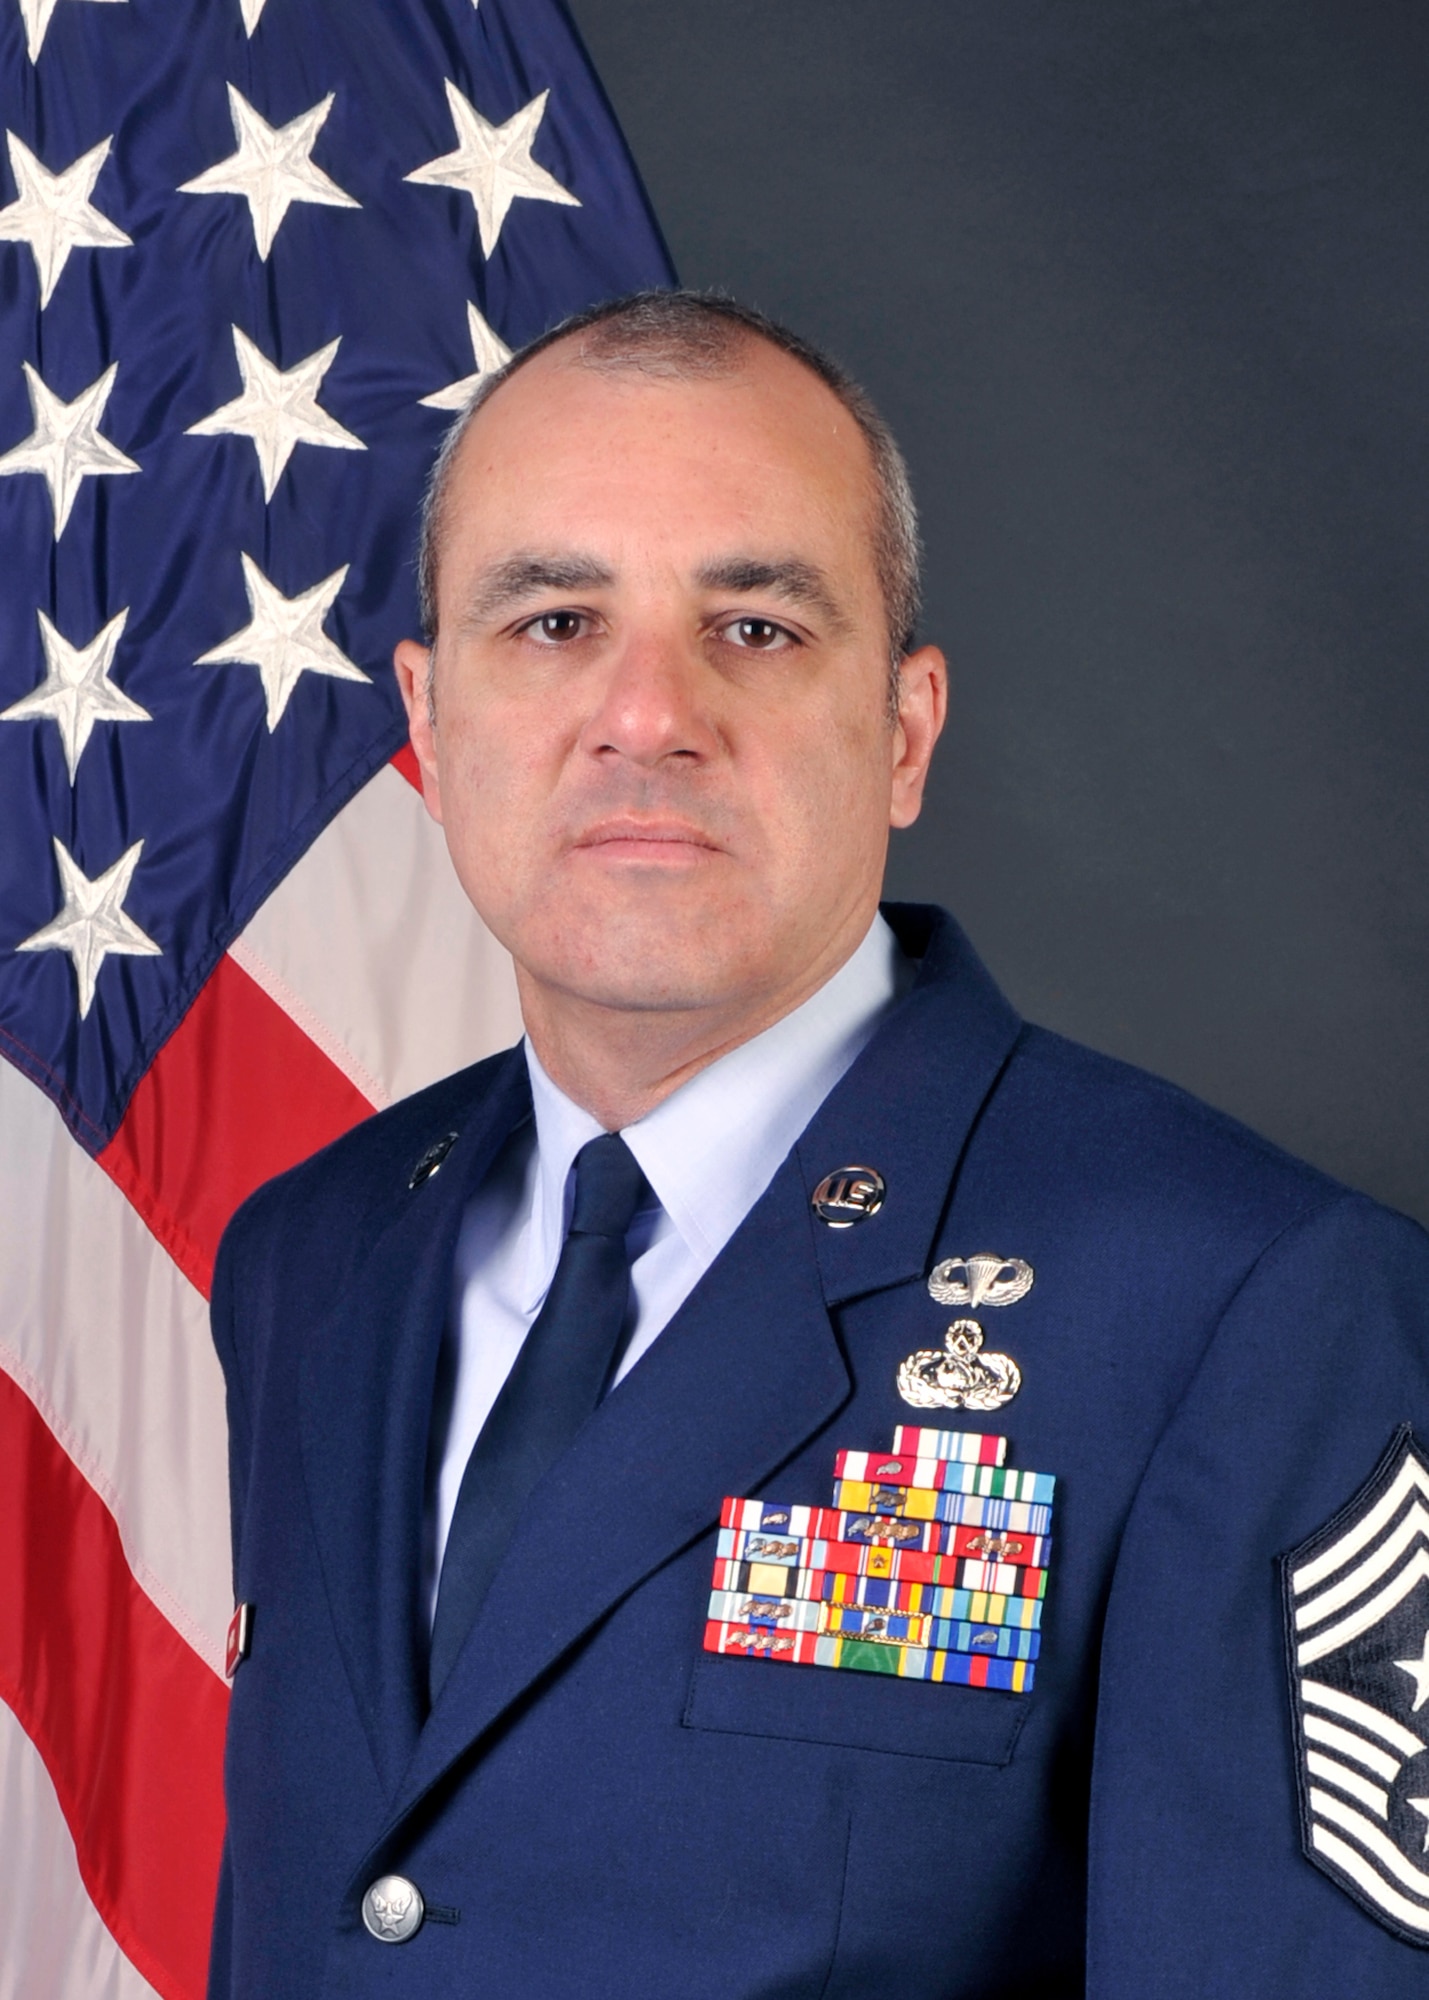 Chief Master Sgt. James A. Morris is the Command Chief Master Sergeant, 86th Airlift Wing, Ramstein Air Base, Germany.